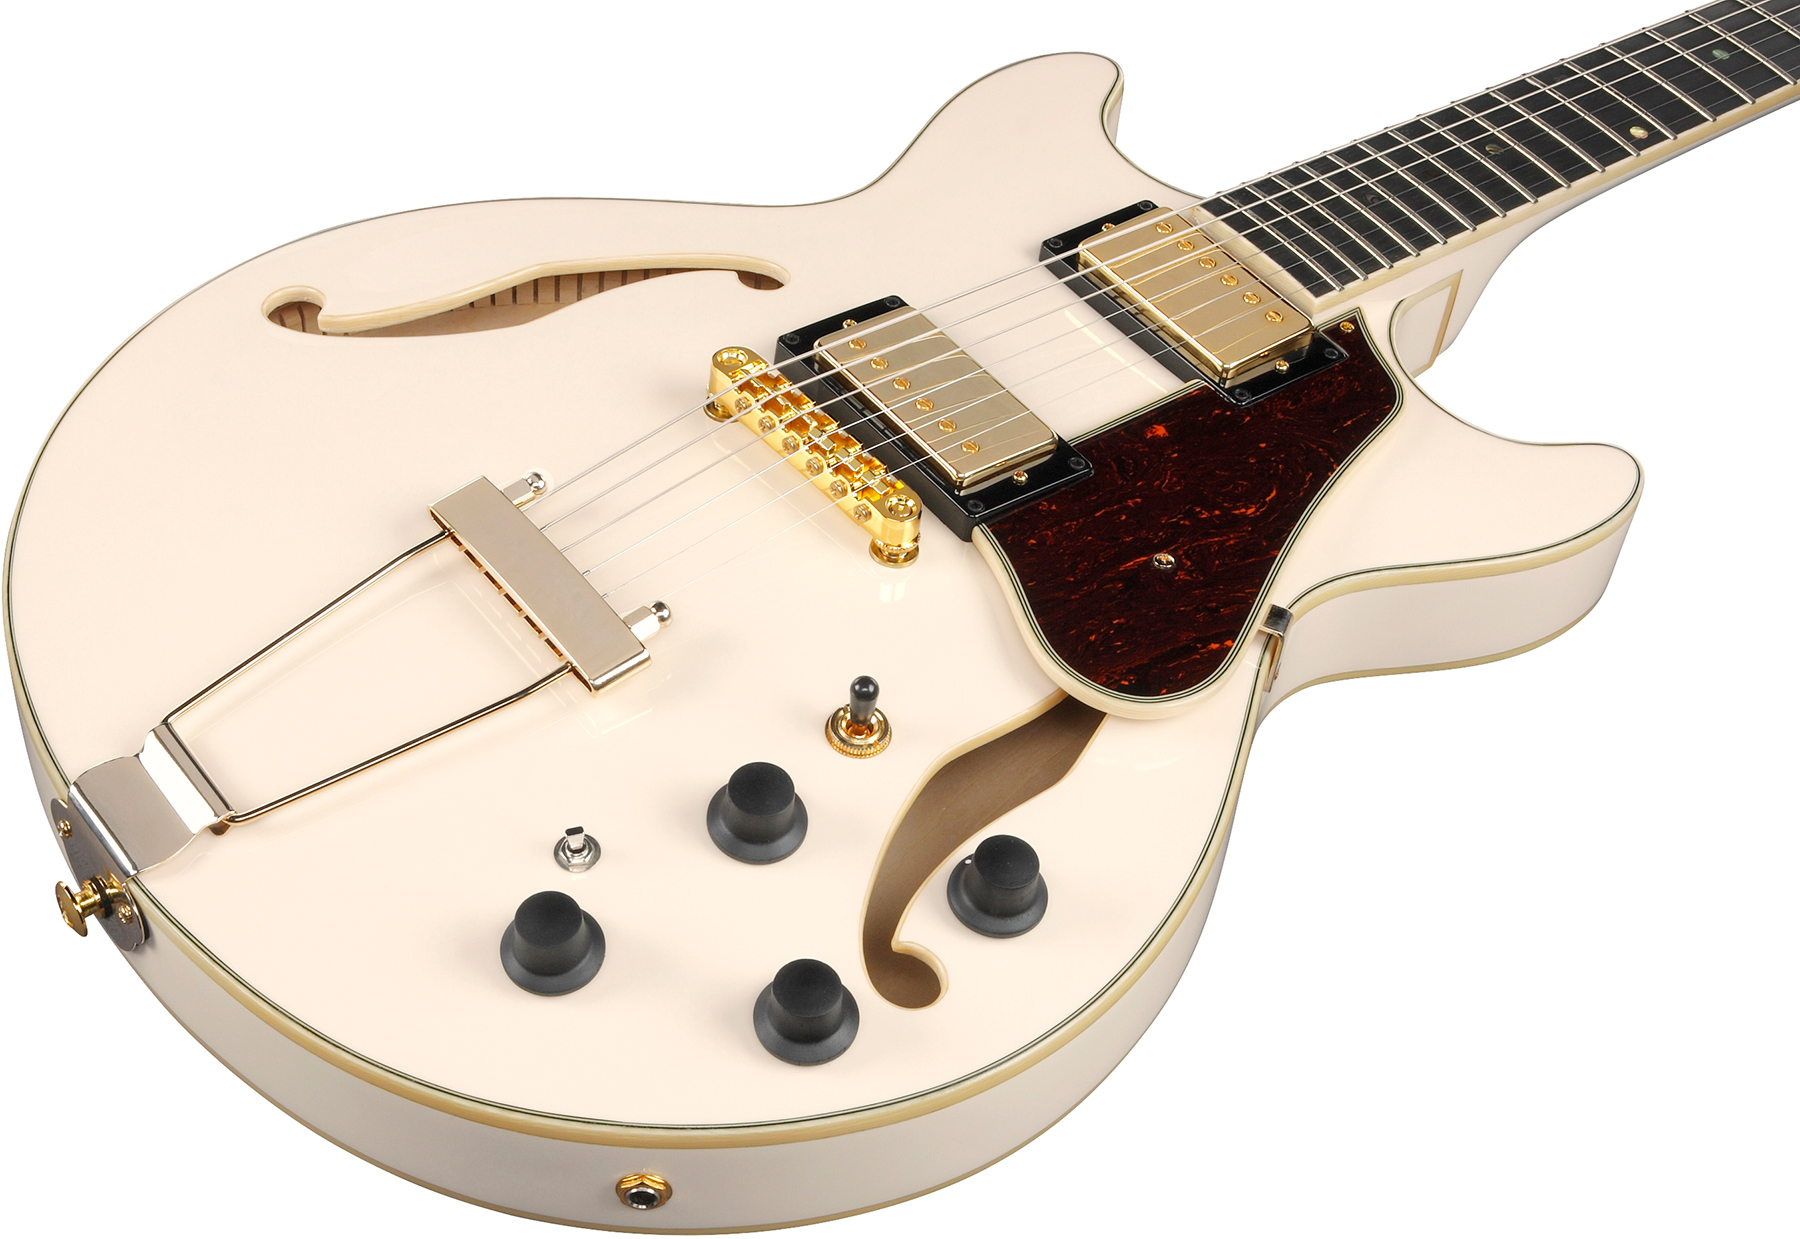 Ibanez Amh90 Iv Artcore Expressionist 2h Ht Eb - Ivory - Hollow-body electric guitar - Variation 2